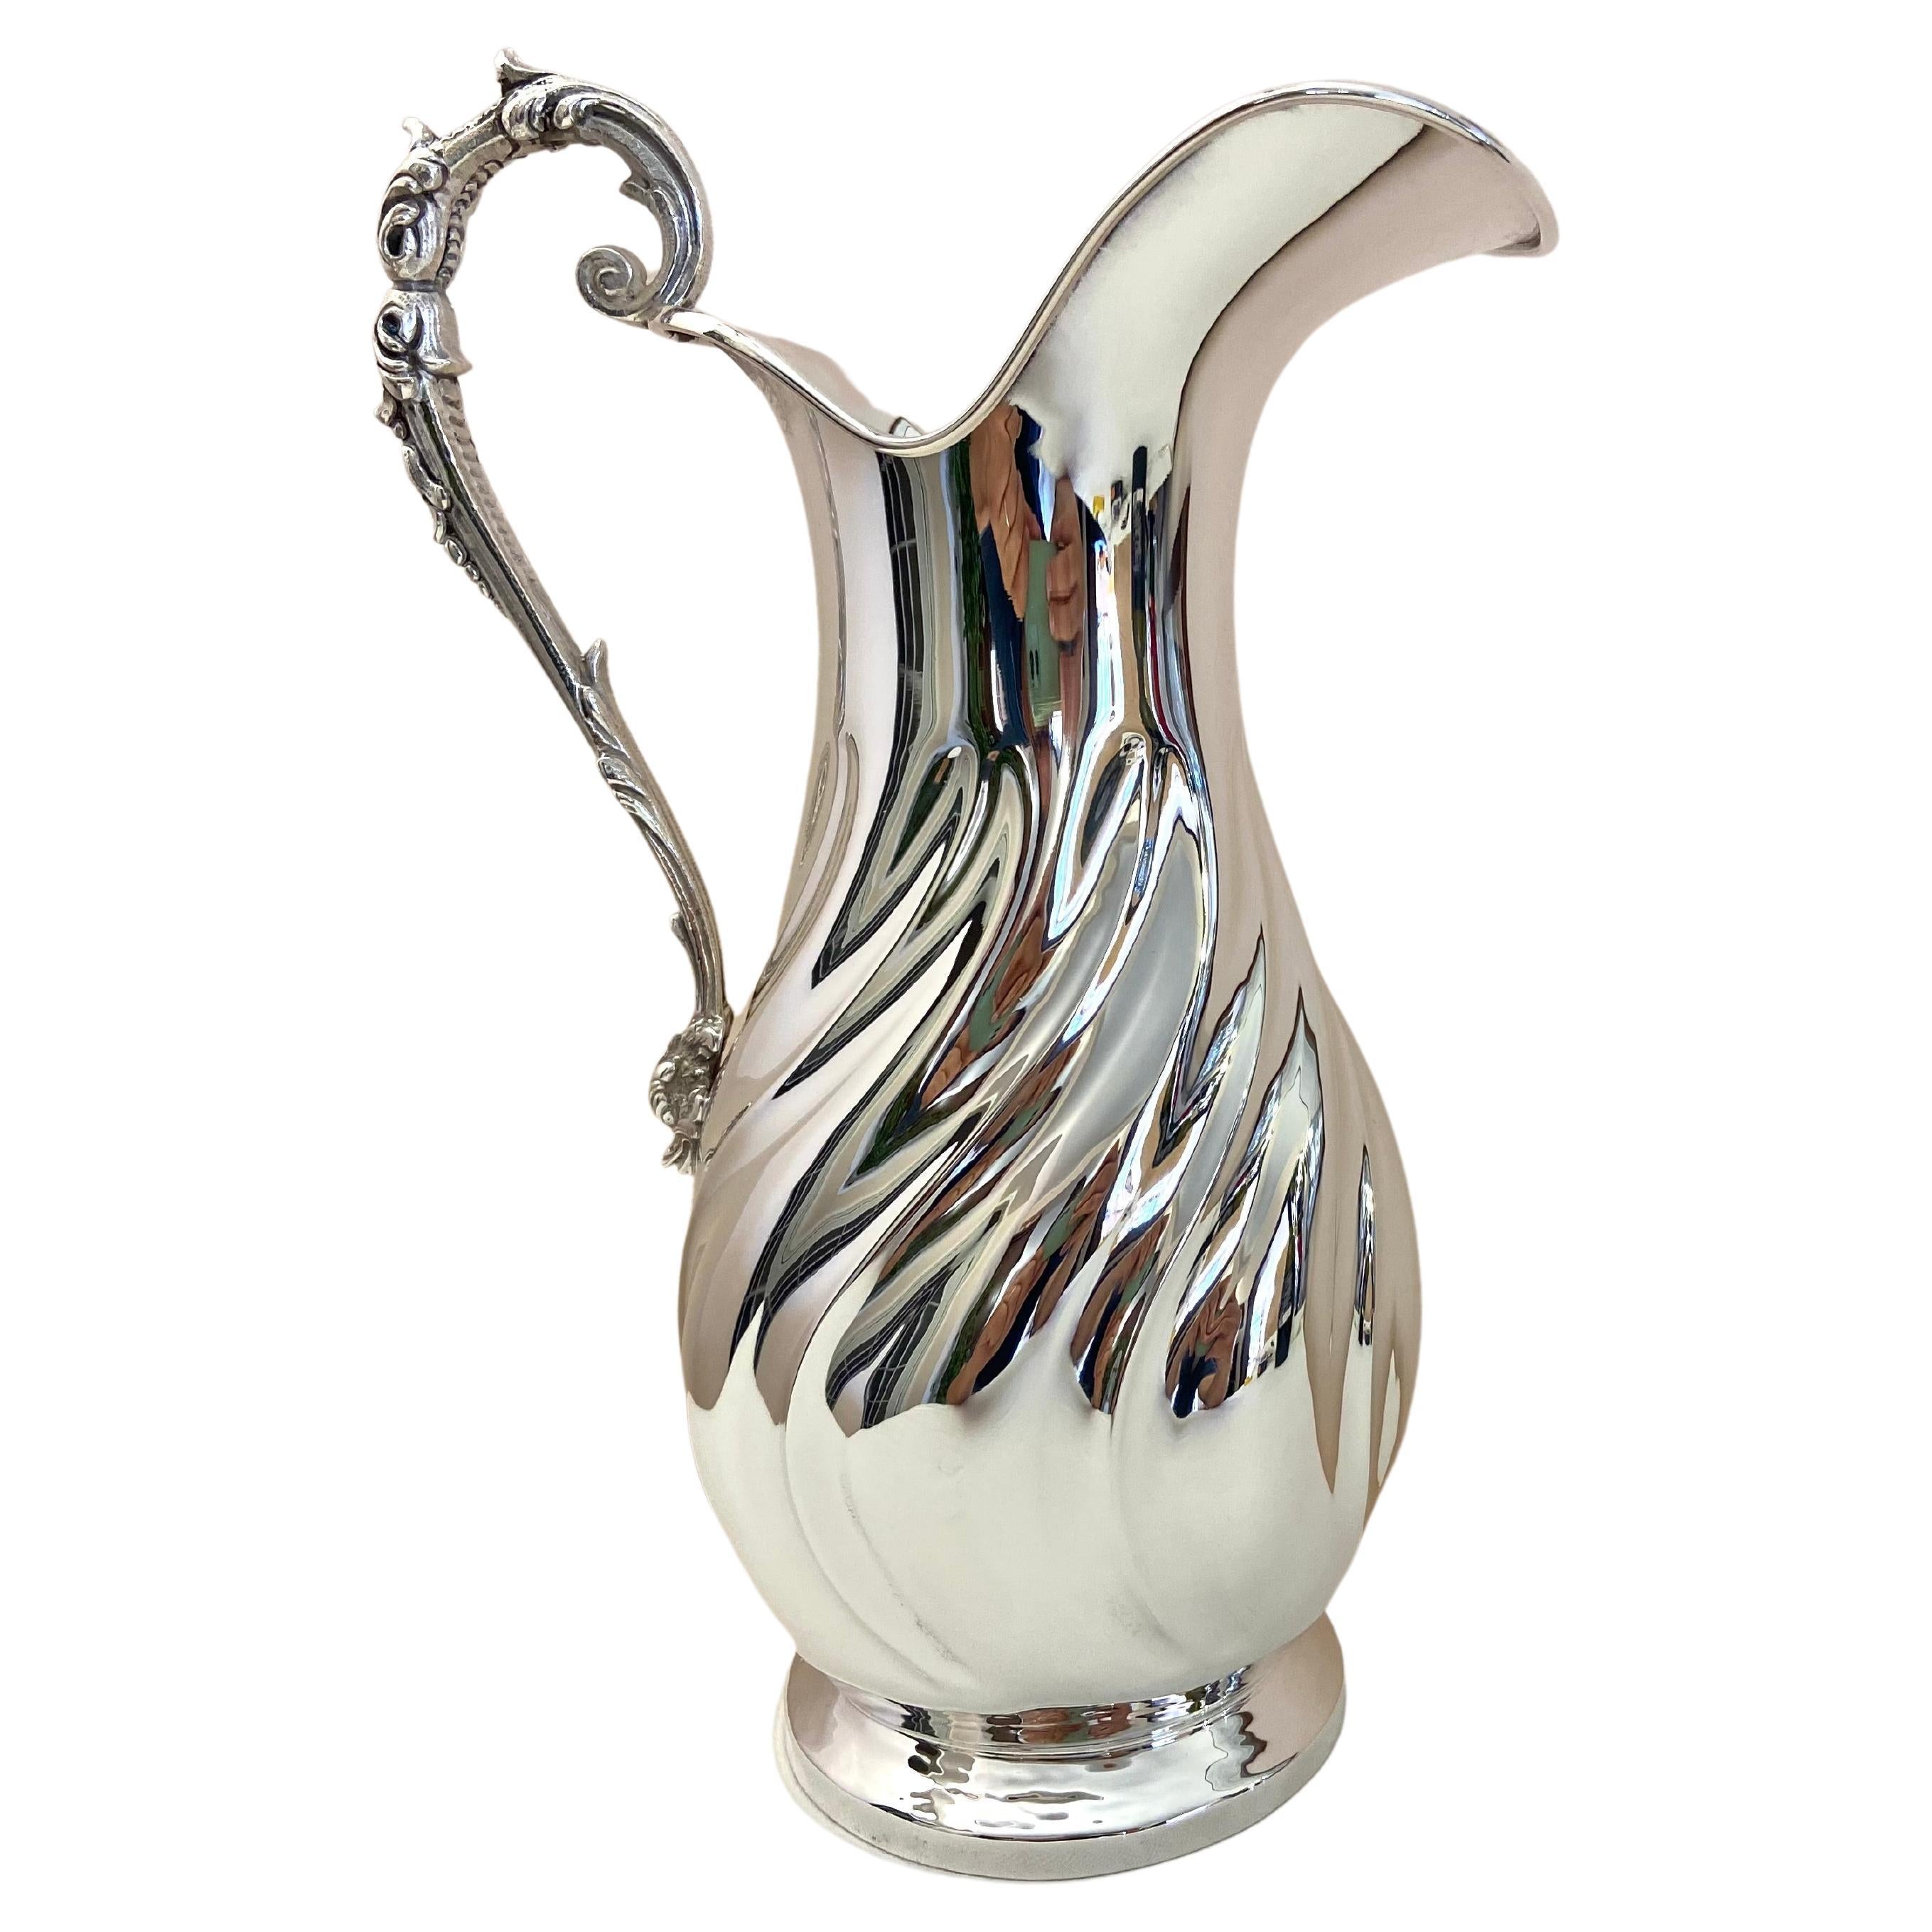 800 Silver Pitcher, New Item from My Jewelry For Sale